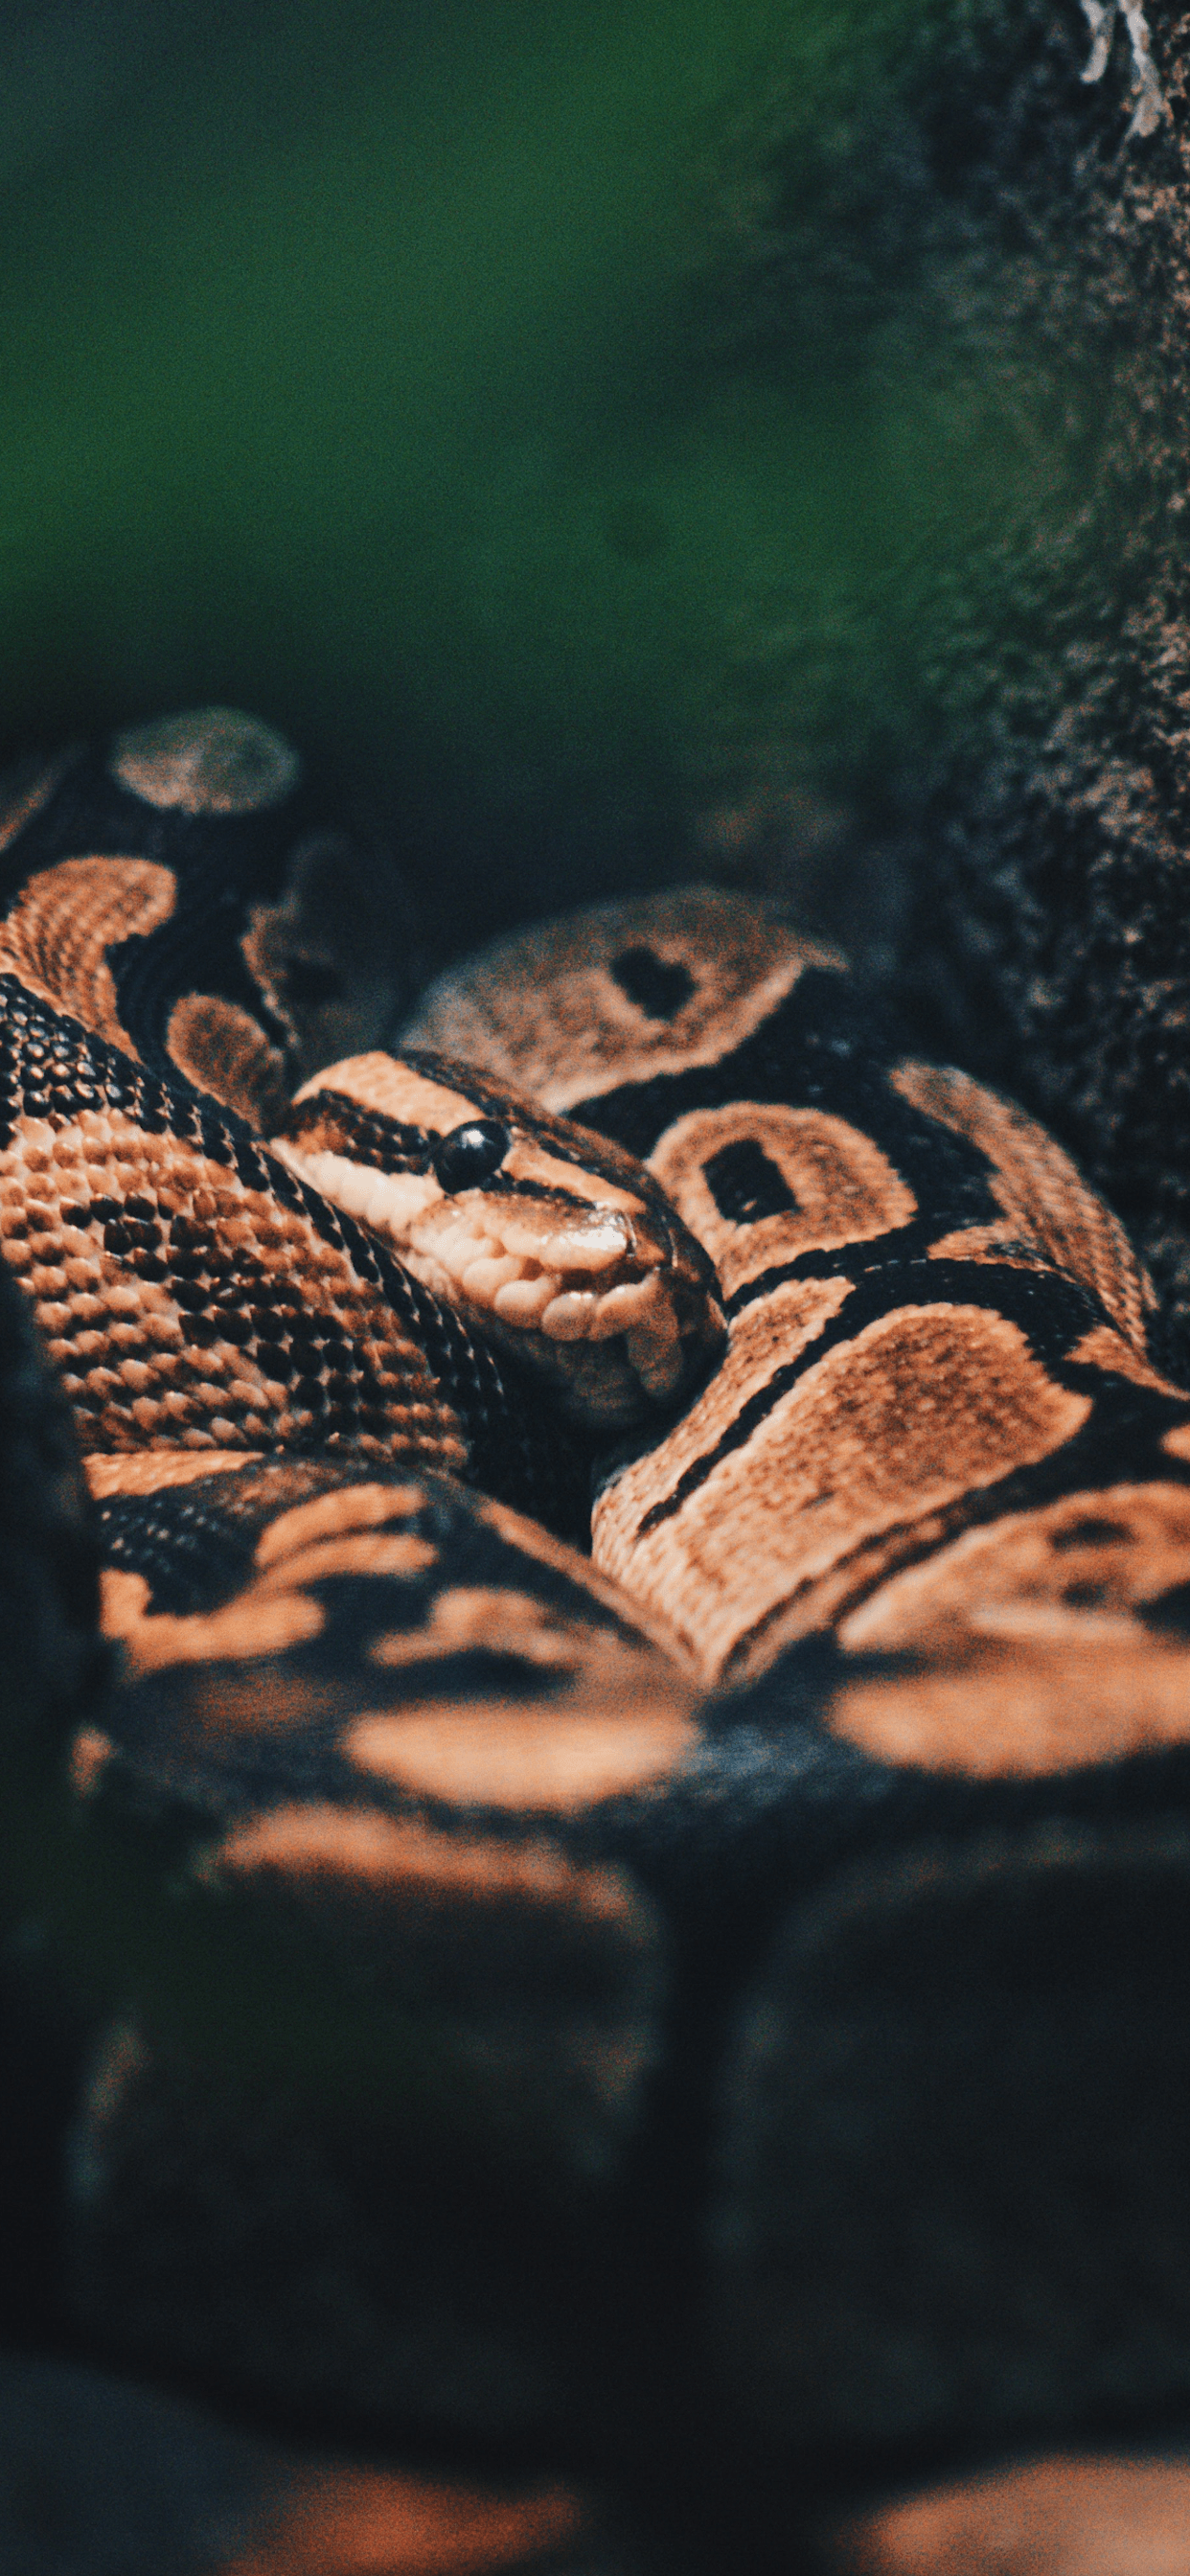 Snakes Wallpaper for iPhone Pro Max, X, 6